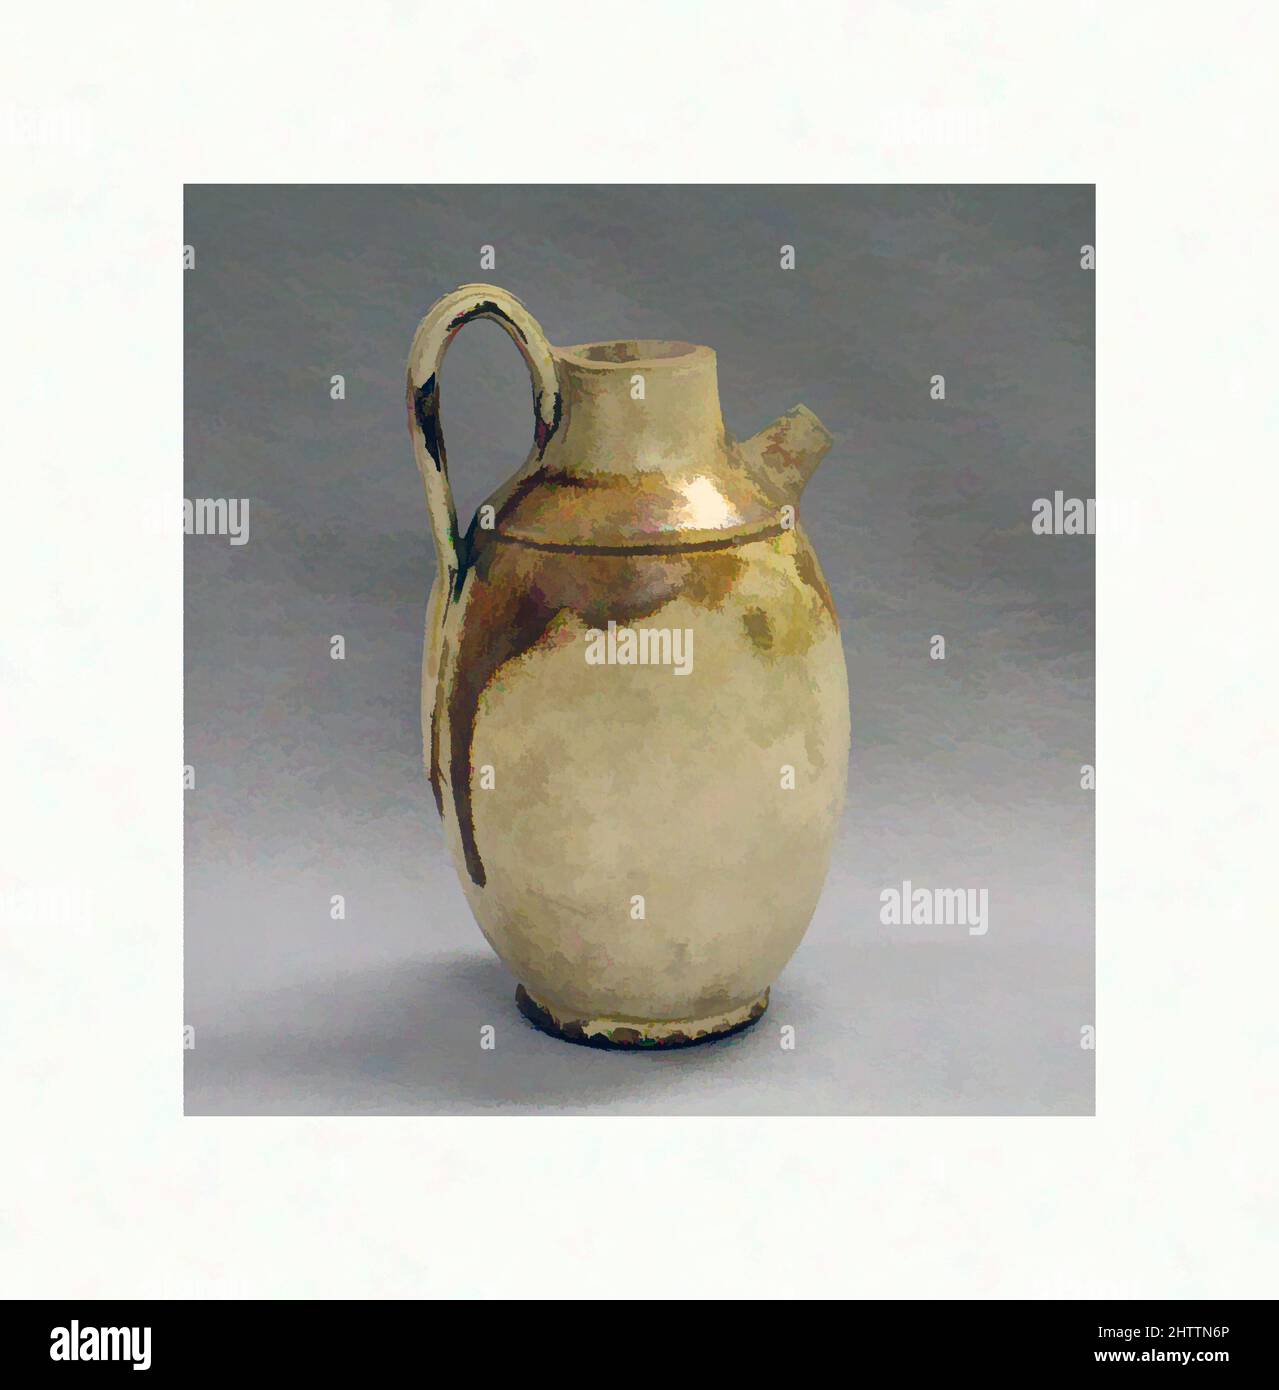 Art inspired by Jug, Northern Song dynasty (960–1127), China, Pottery, H. 7 1/2 in. (19.1 cm), Ceramics, Classic works modernized by Artotop with a splash of modernity. Shapes, color and value, eye-catching visual impact on art. Emotions through freedom of artworks in a contemporary way. A timeless message pursuing a wildly creative new direction. Artists turning to the digital medium and creating the Artotop NFT Stock Photo